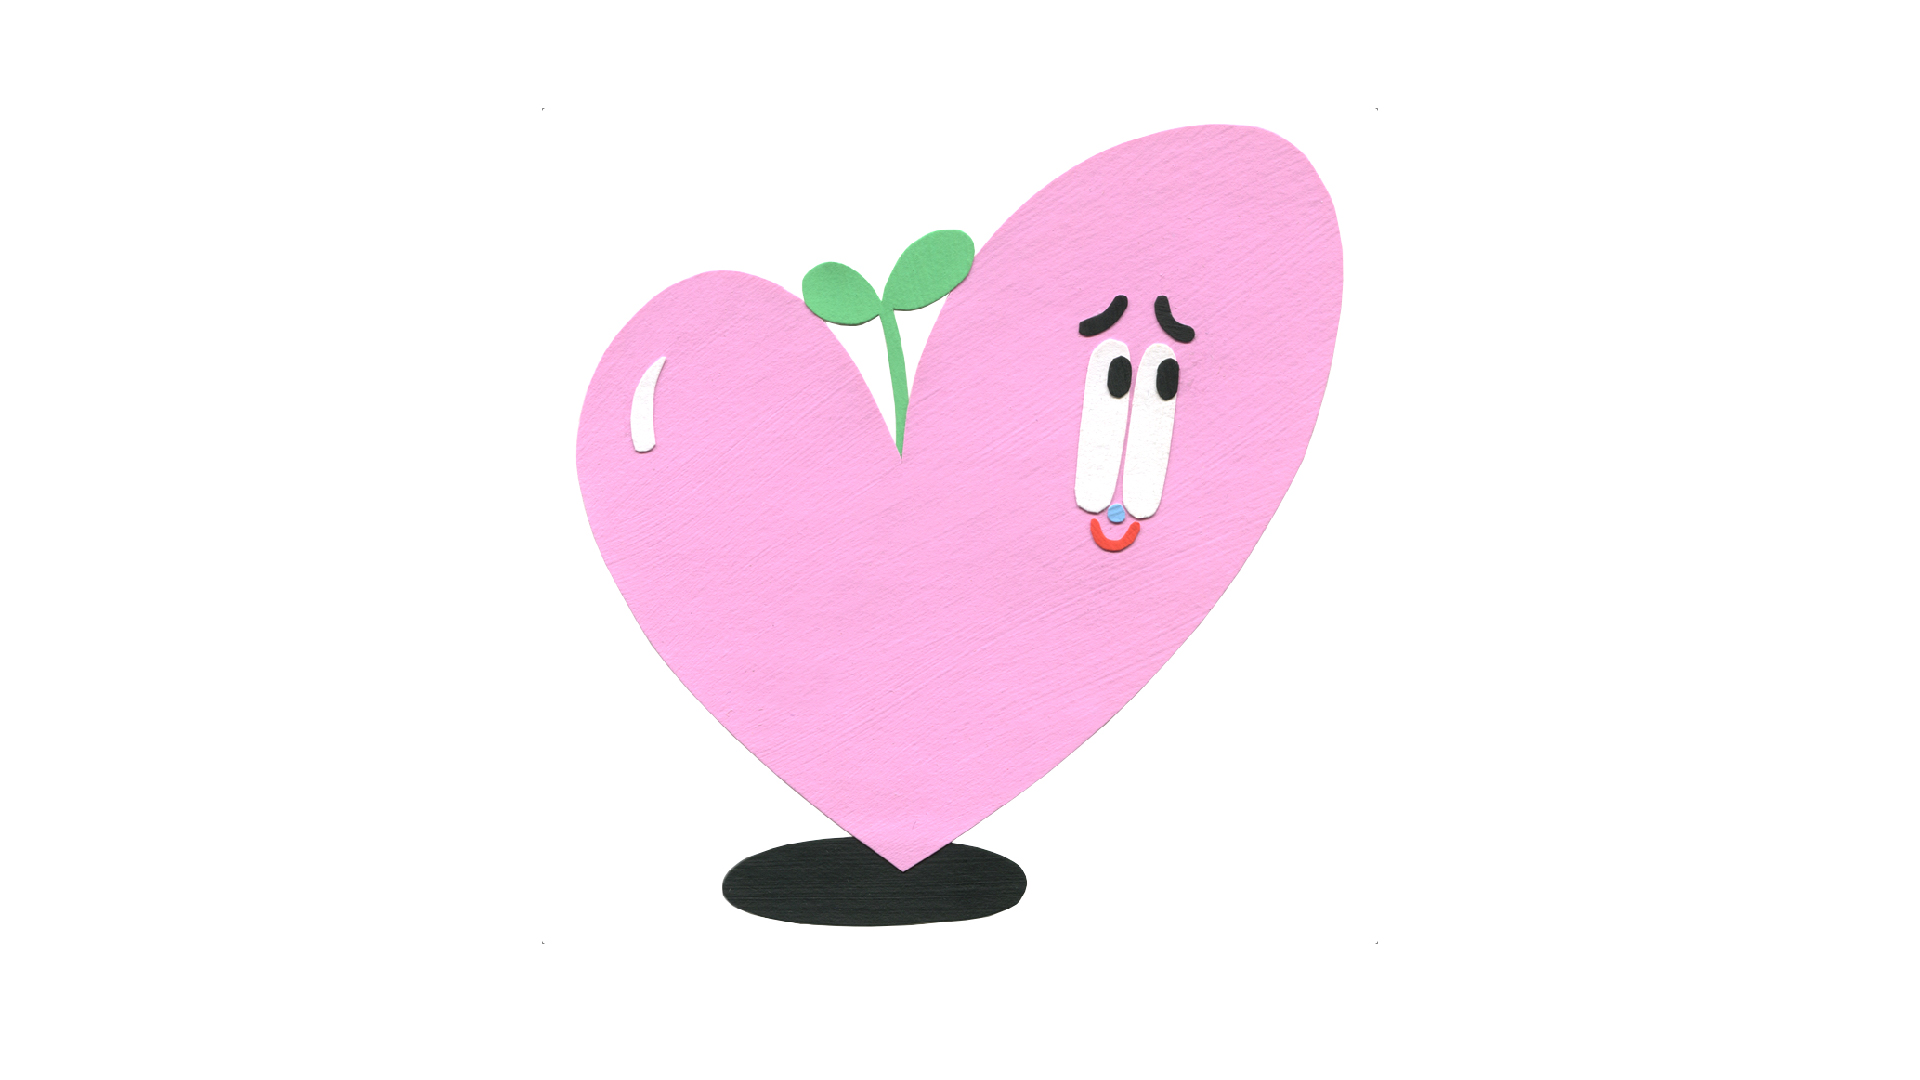 A drawing of pink heart, smiling, with a flower growing from its body.